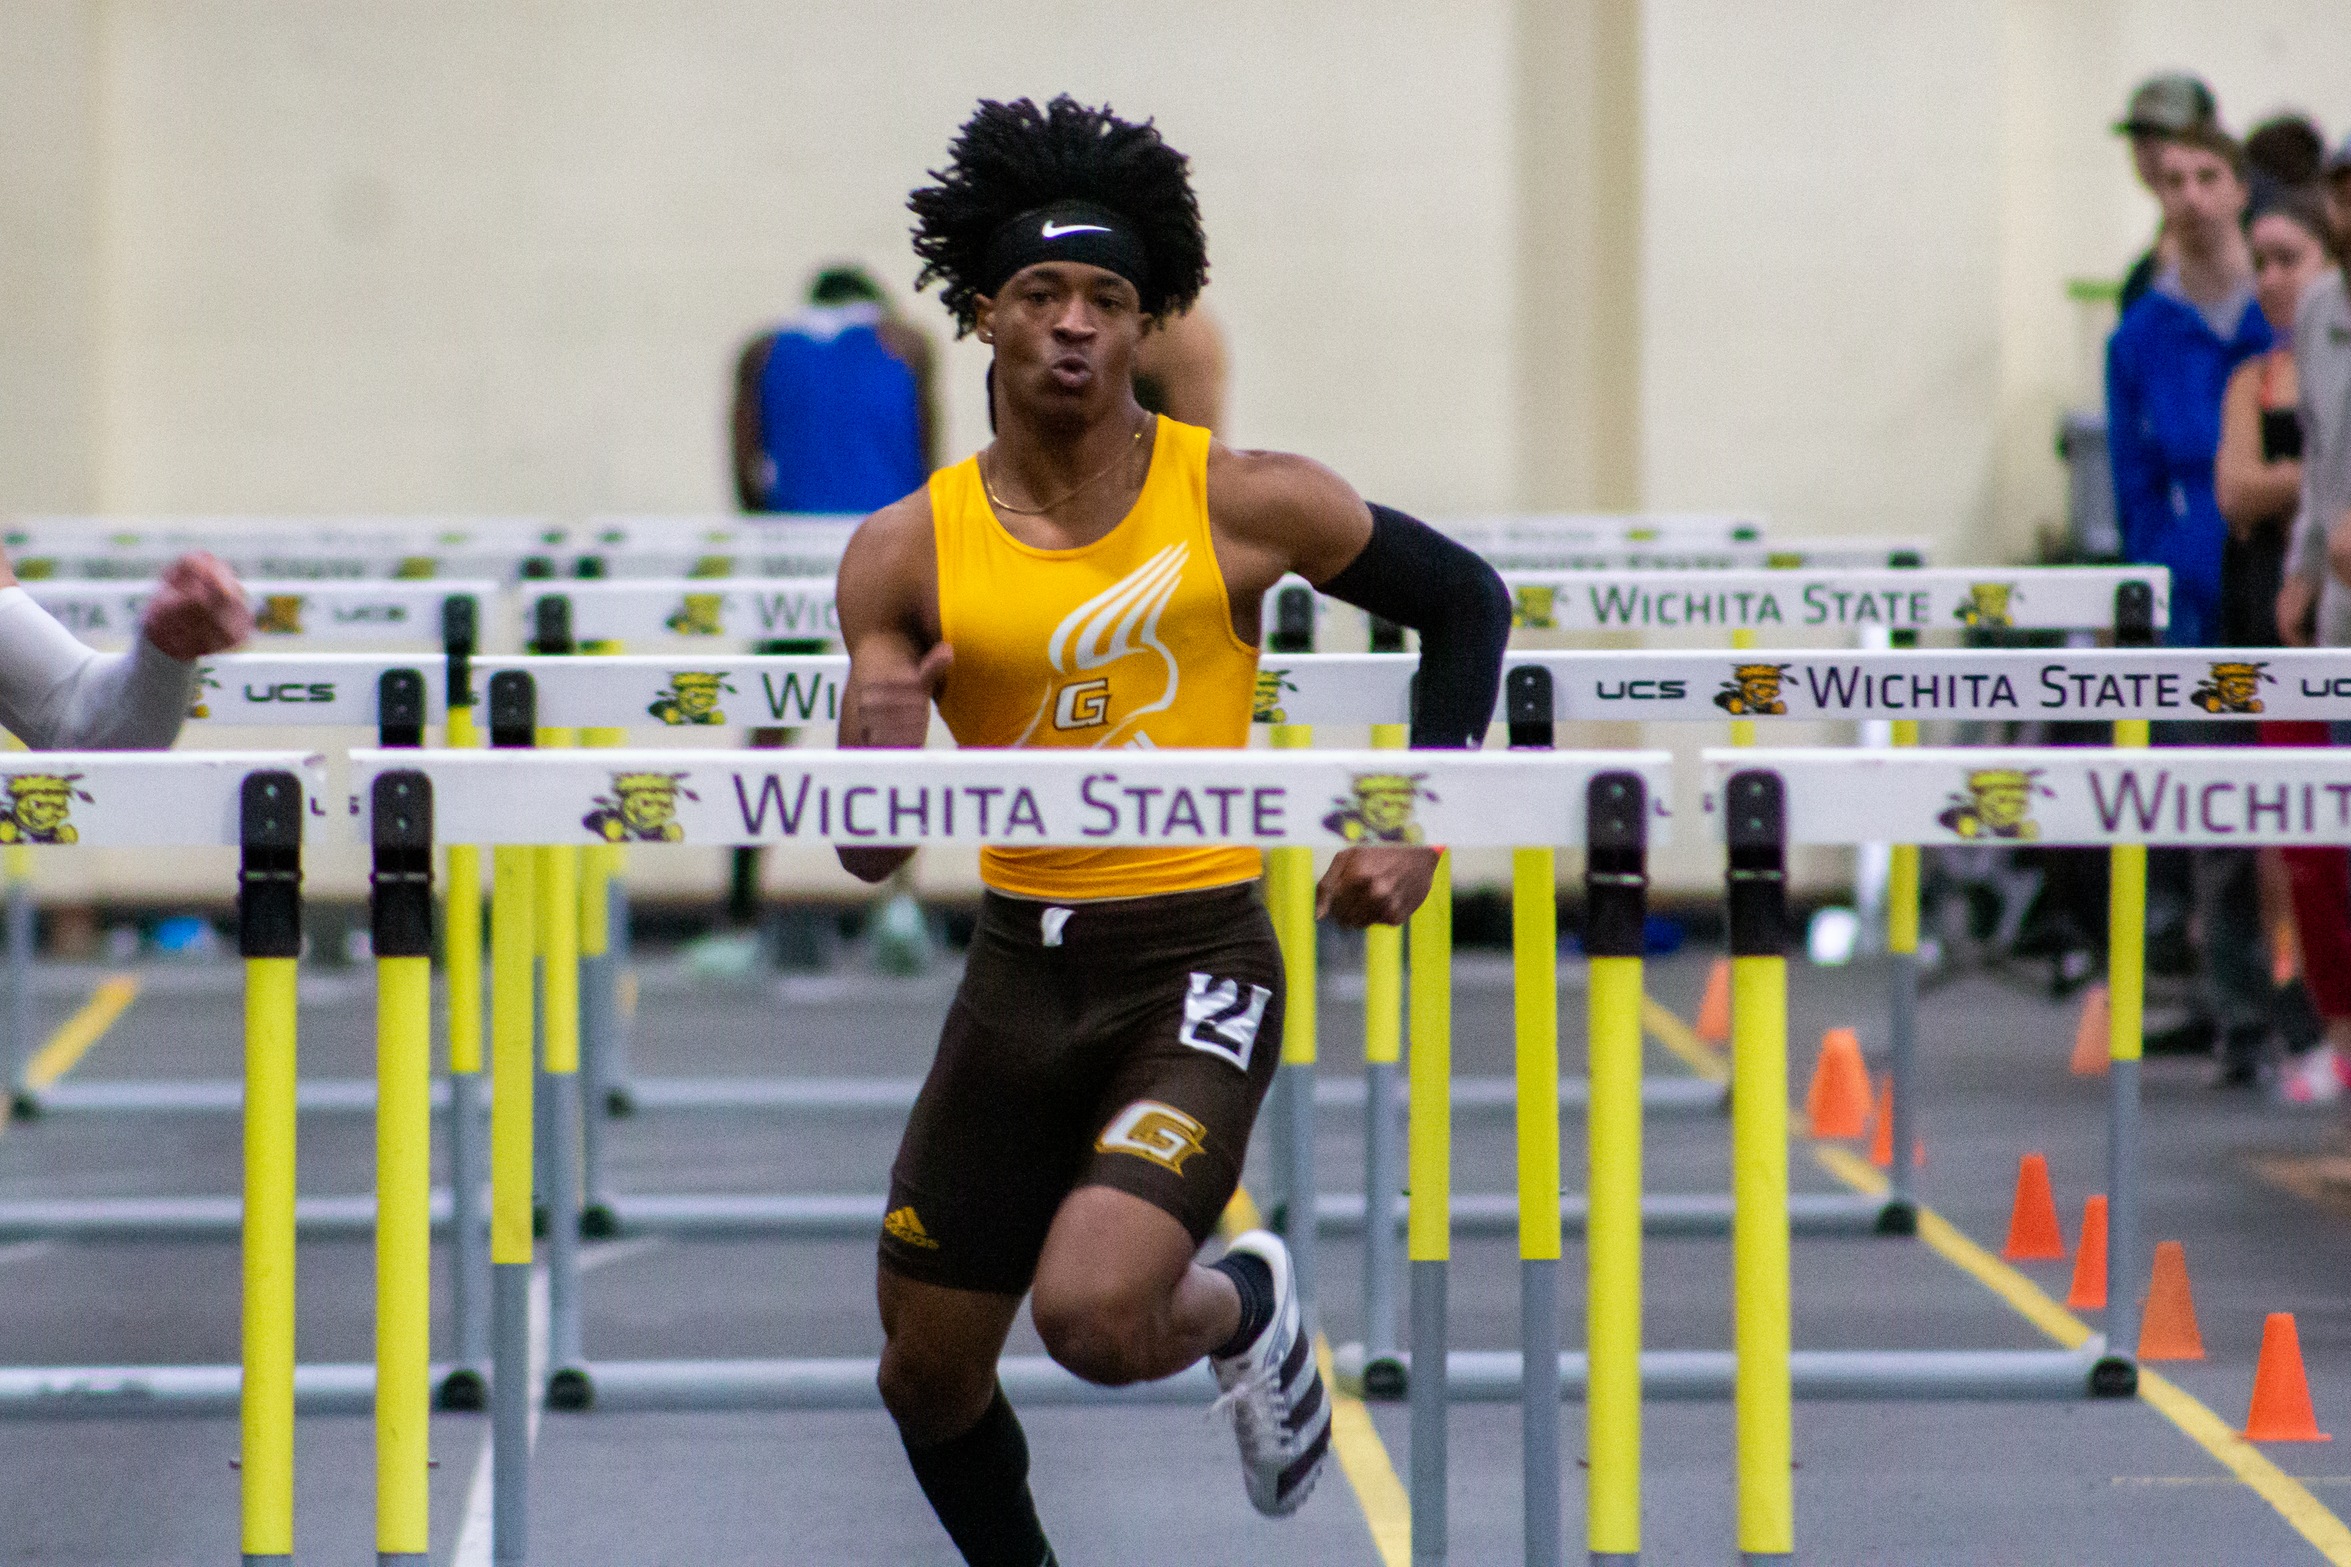 Track and field competes in Wichita and Nebraska